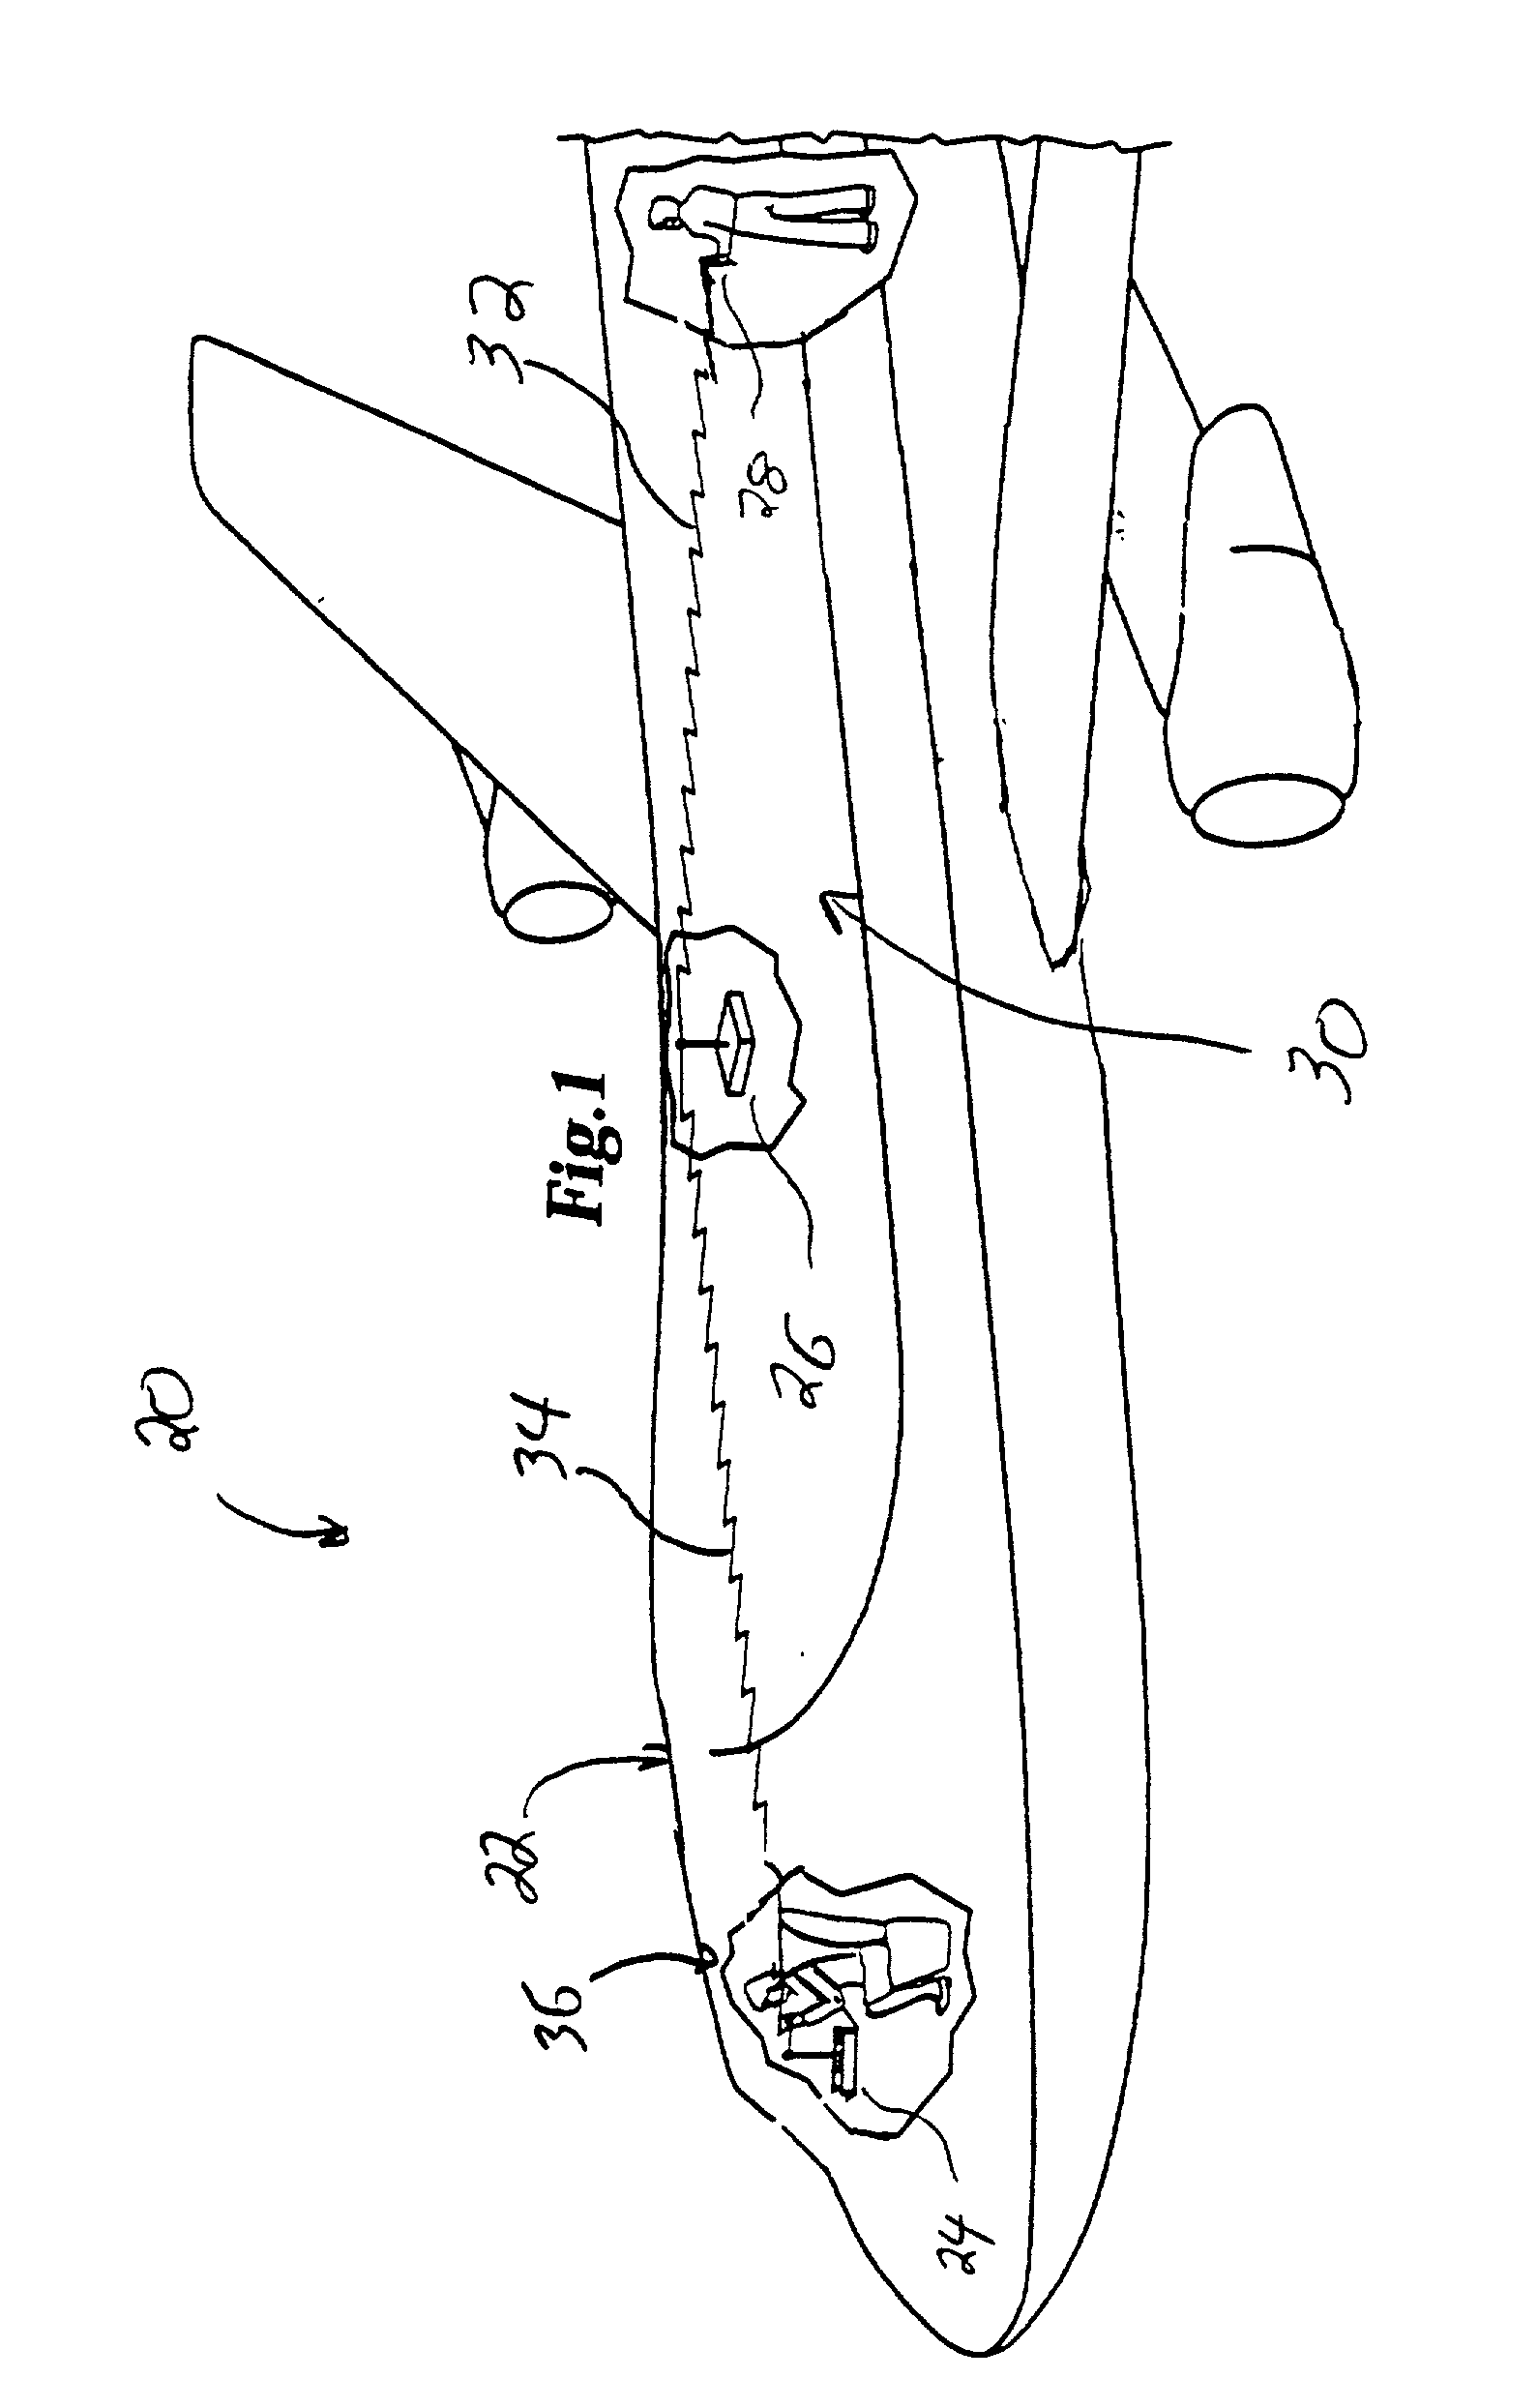 System and method for alerting a cockpit crew of terrorist activity